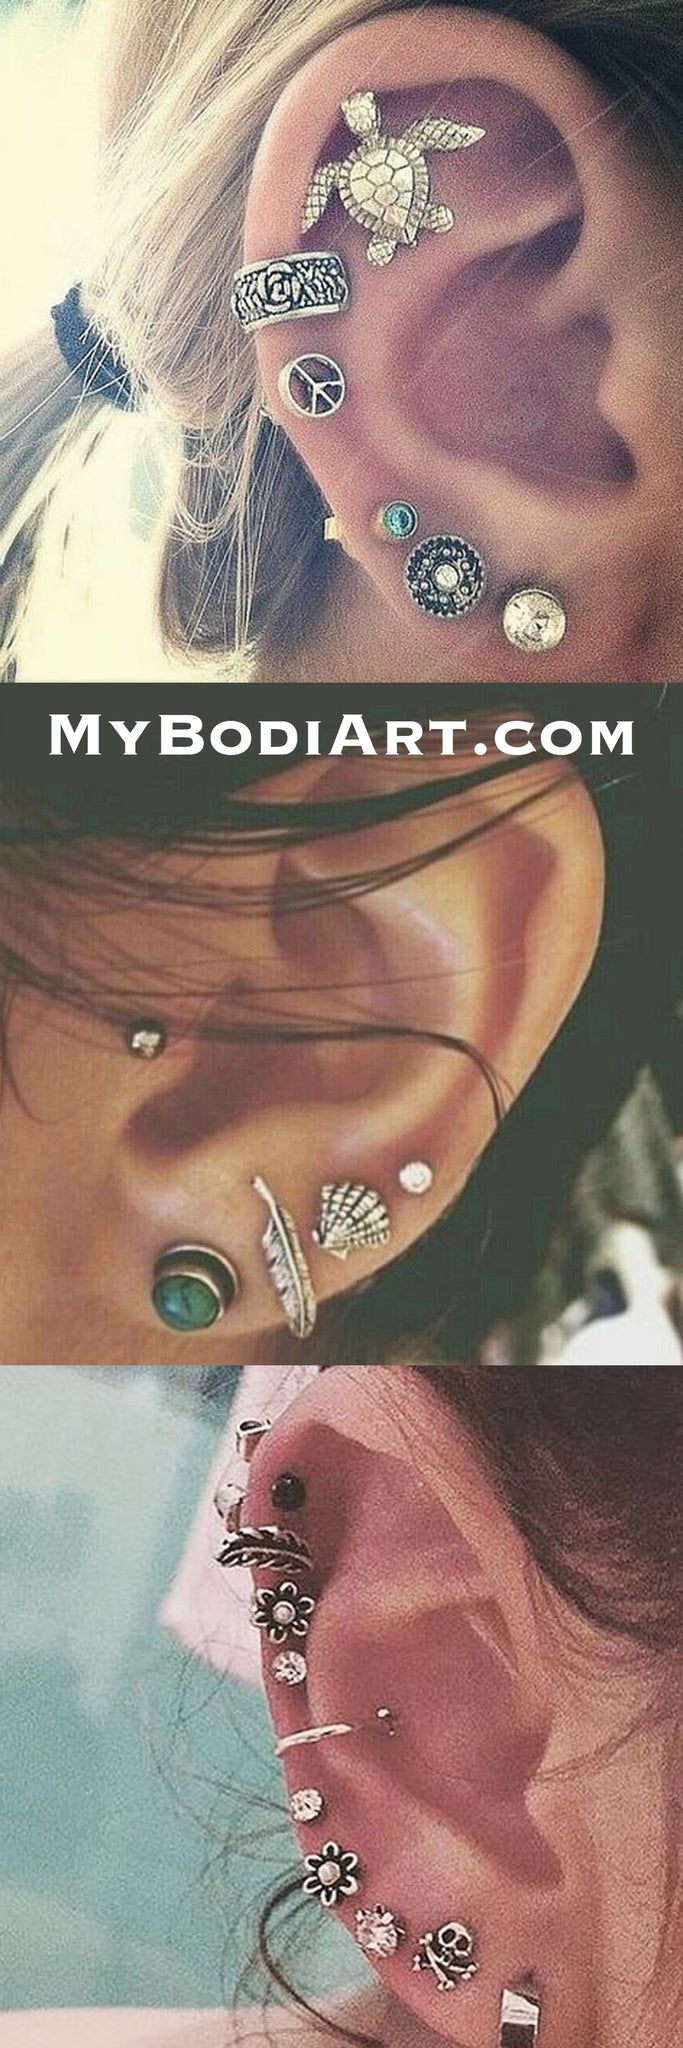 Pretty Mutiple Ear Piercing Ideas Combinations at MyBodiArt.com - Anitqued Tribal Oor Piercing Turtle Cartilage Stud - Feather Earring - Flower Auricle Jewelry